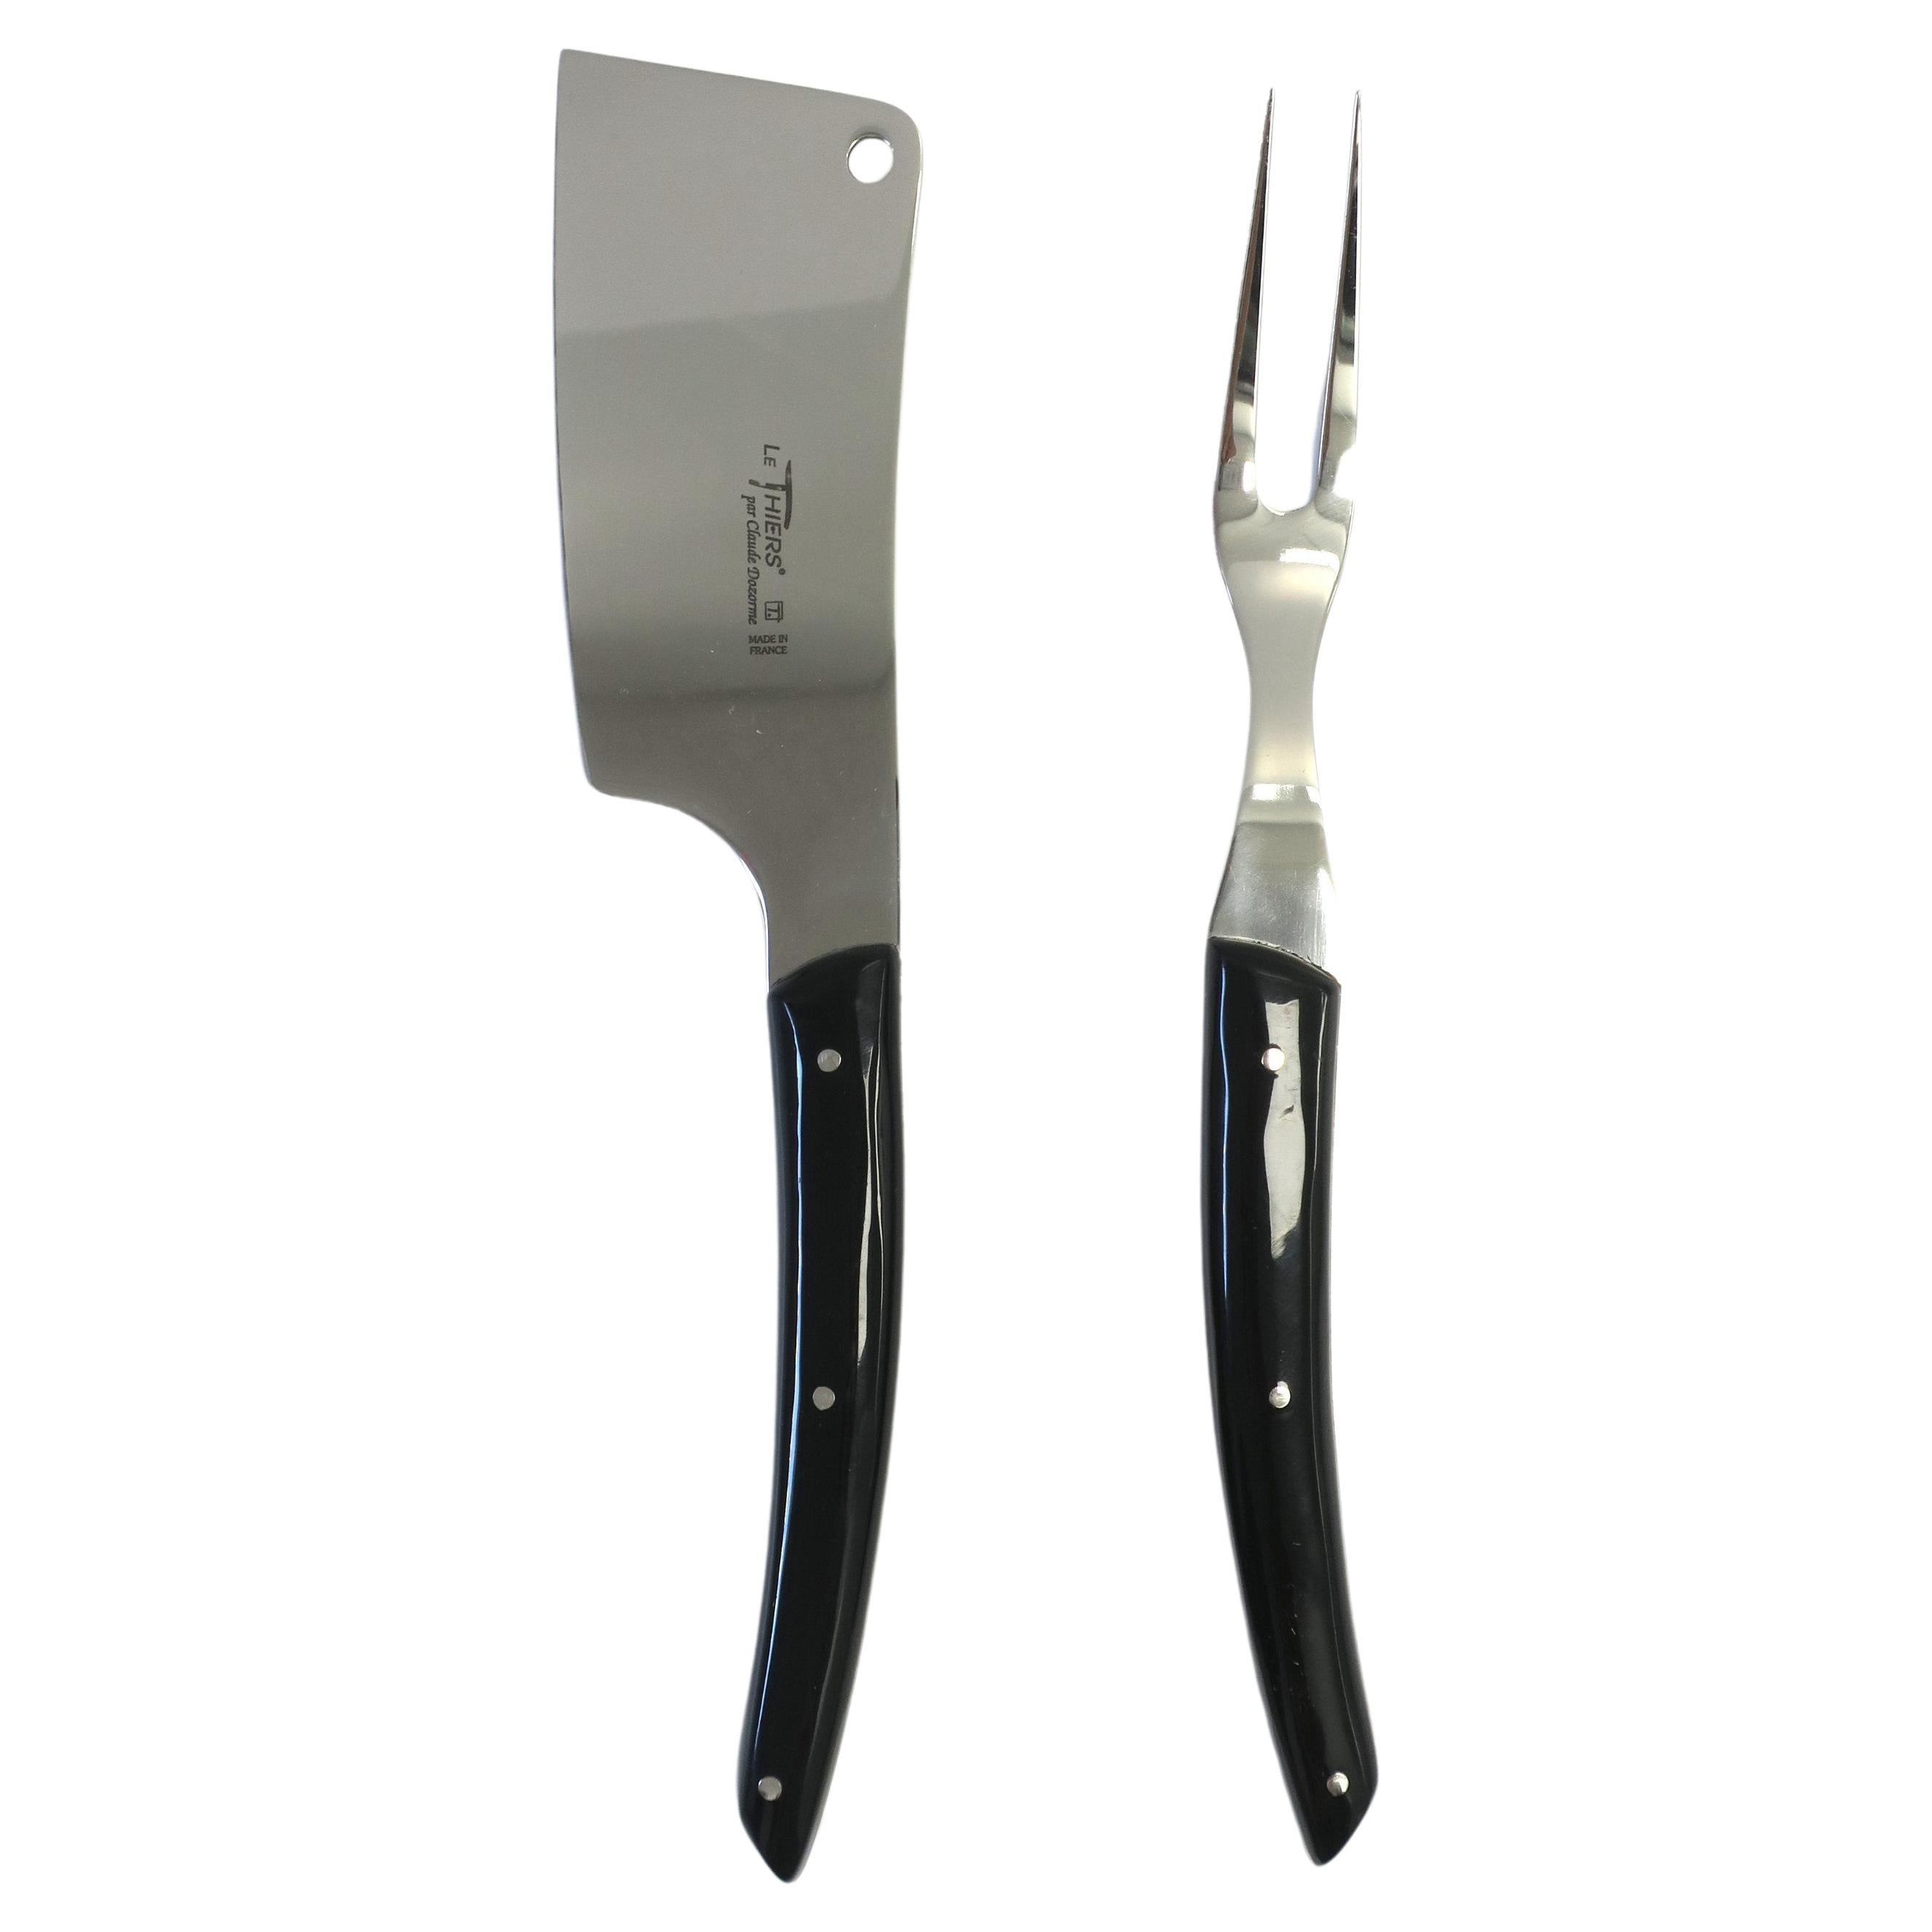 https://a.1stdibscdn.com/french-fromage-cheese-steel-knife-and-fork-cutlery-service-set-of-2-for-sale/f_13142/f_312792121668370764696/f_31279212_1668370765371_bg_processed.jpg